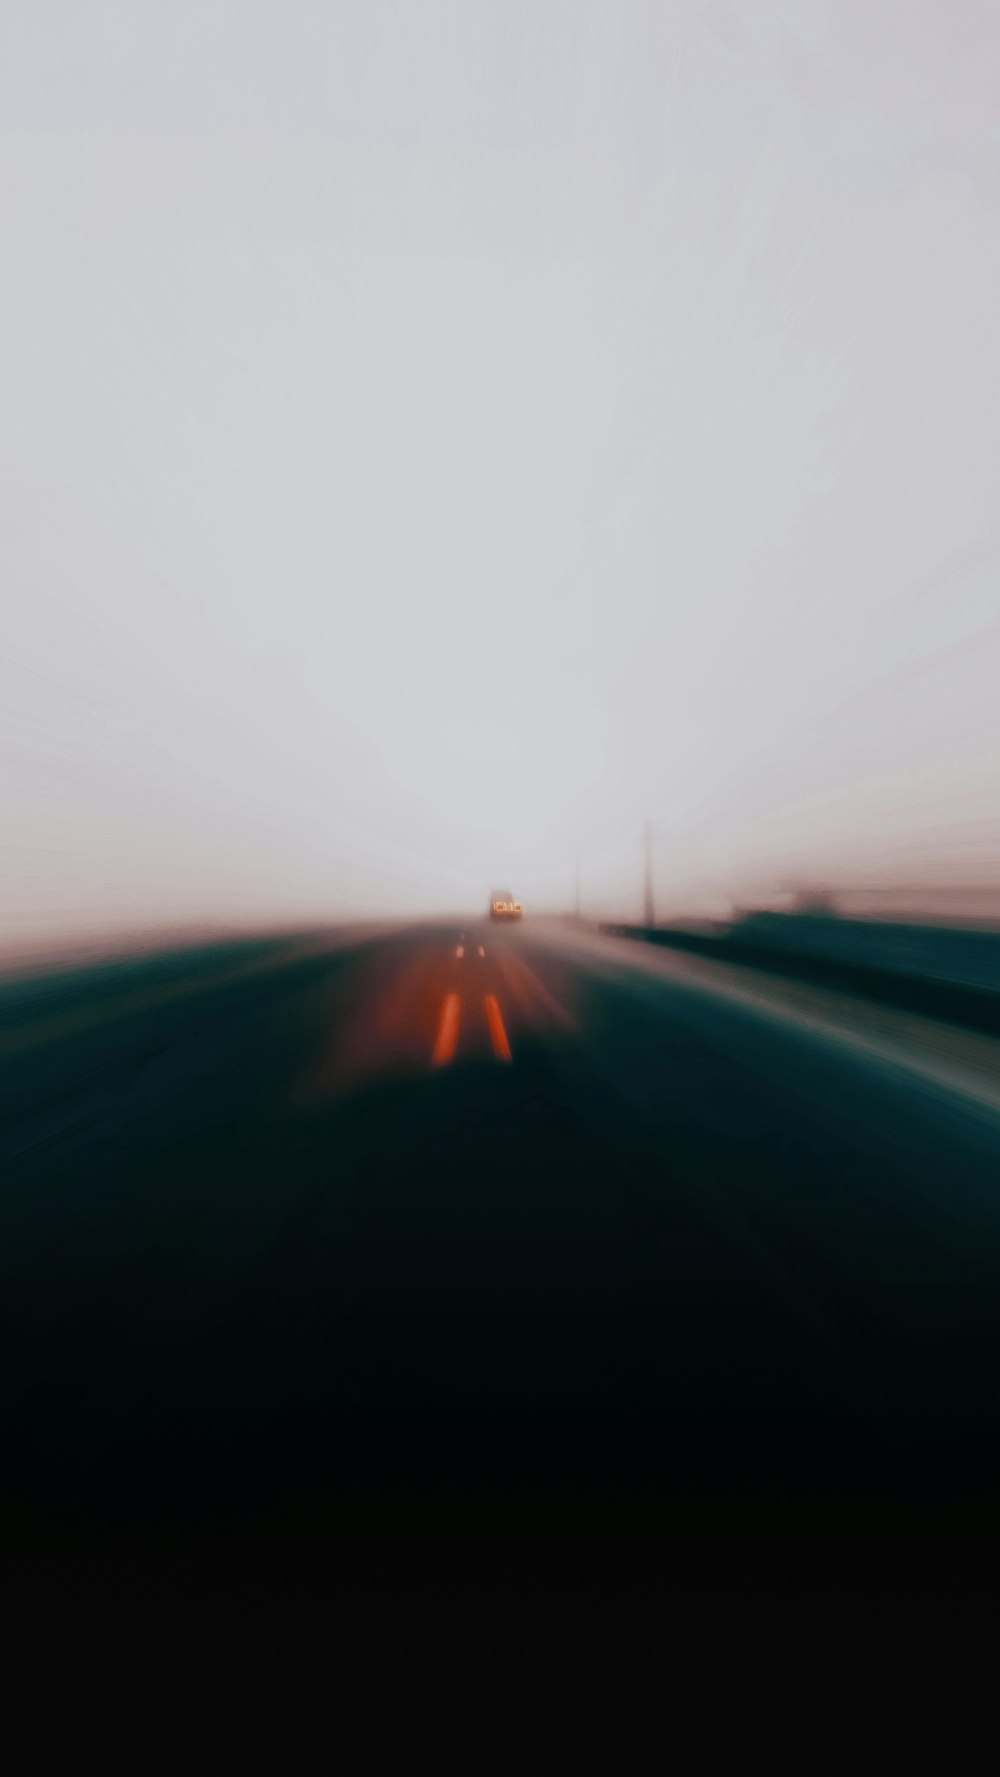 a blurry photo of a highway with a car on it